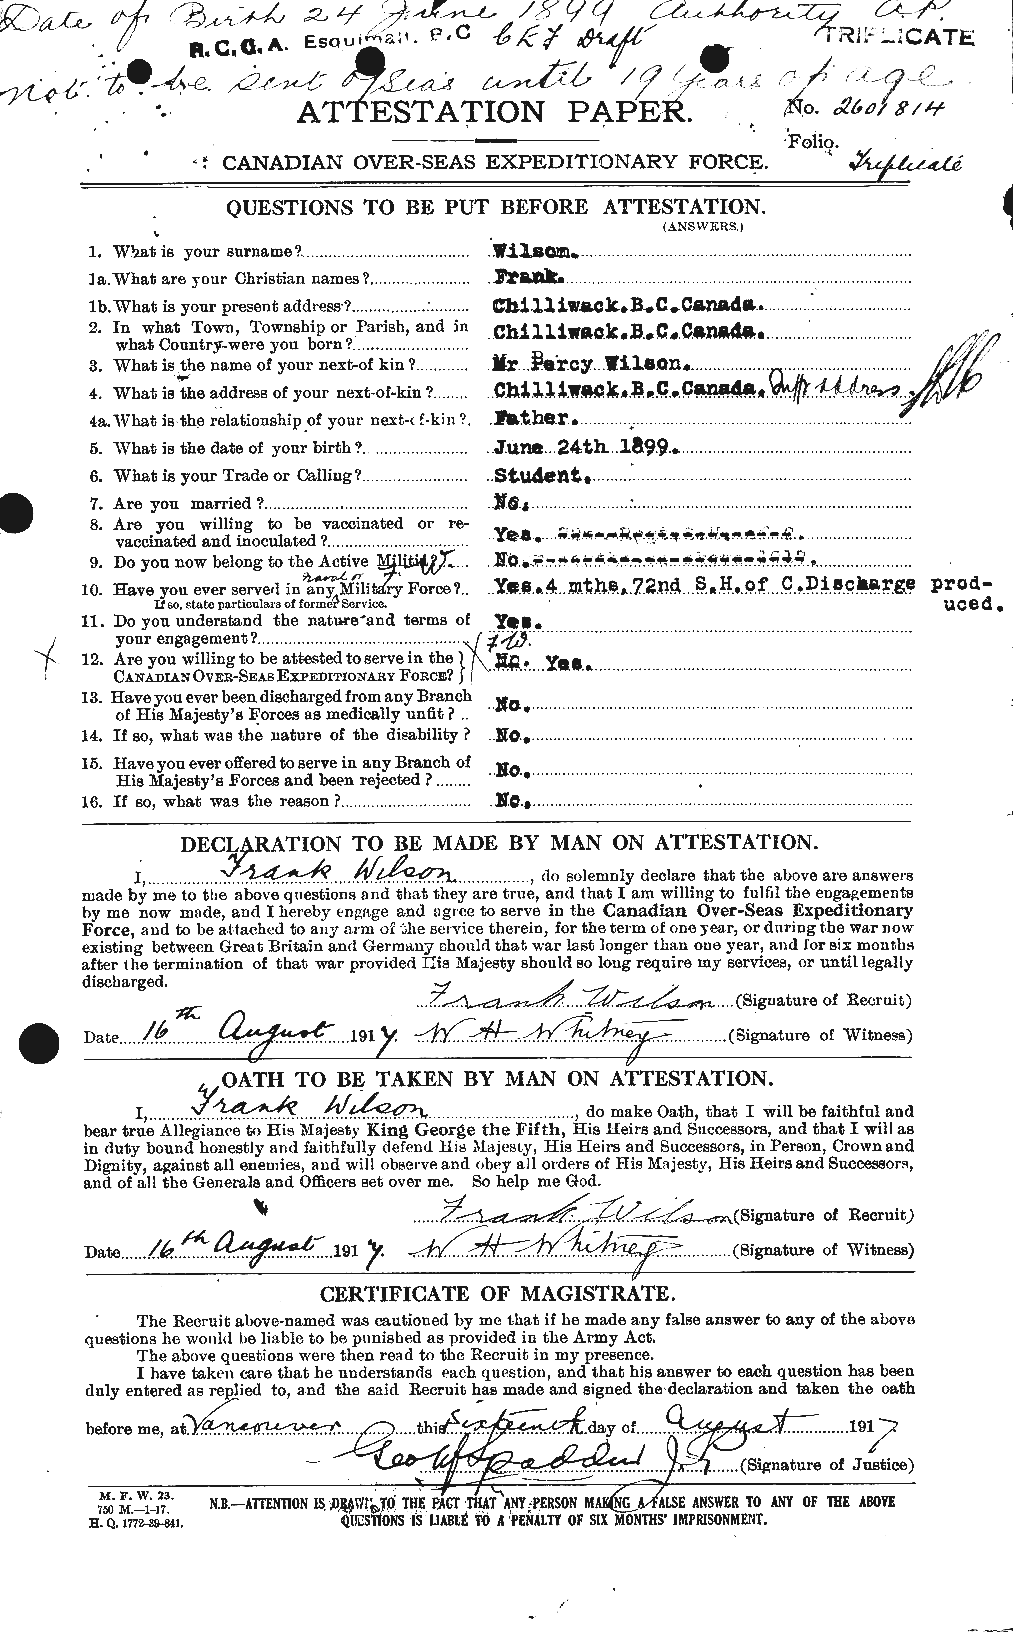 Personnel Records of the First World War - CEF 680633a